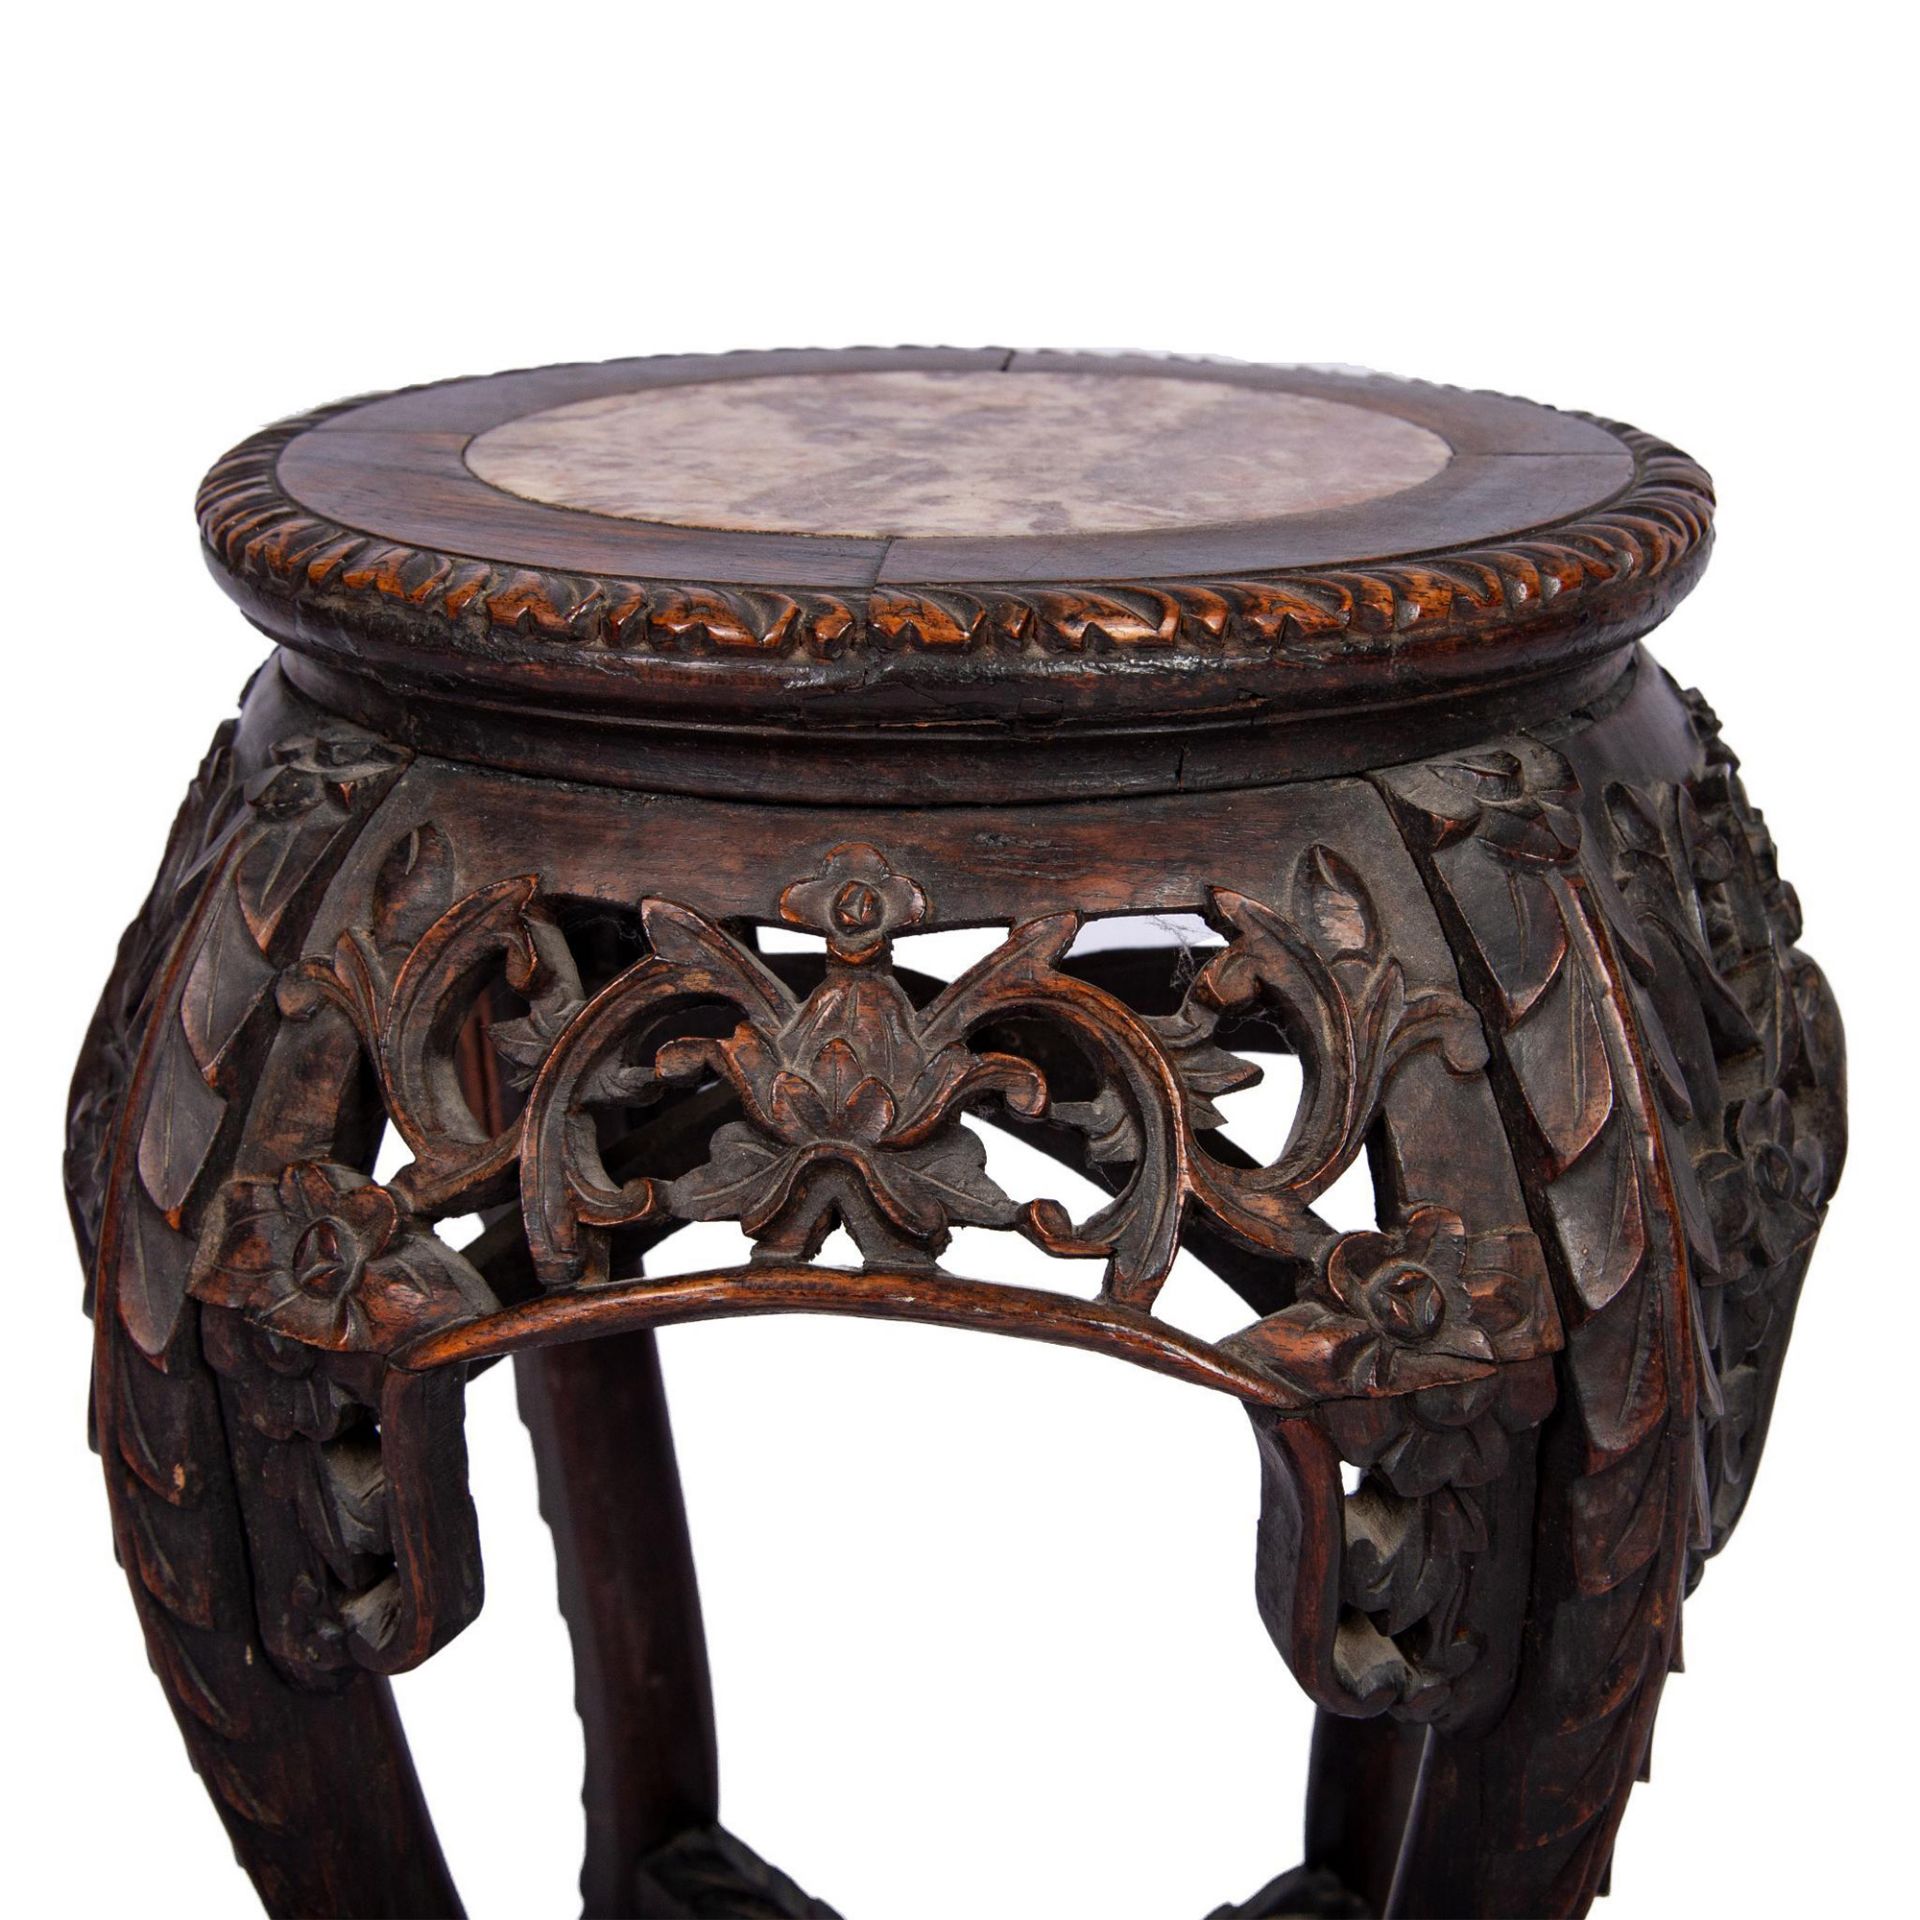 Antique Chinese Jardiniere Stand in Ebonized Wood with Marble Top - Image 3 of 5